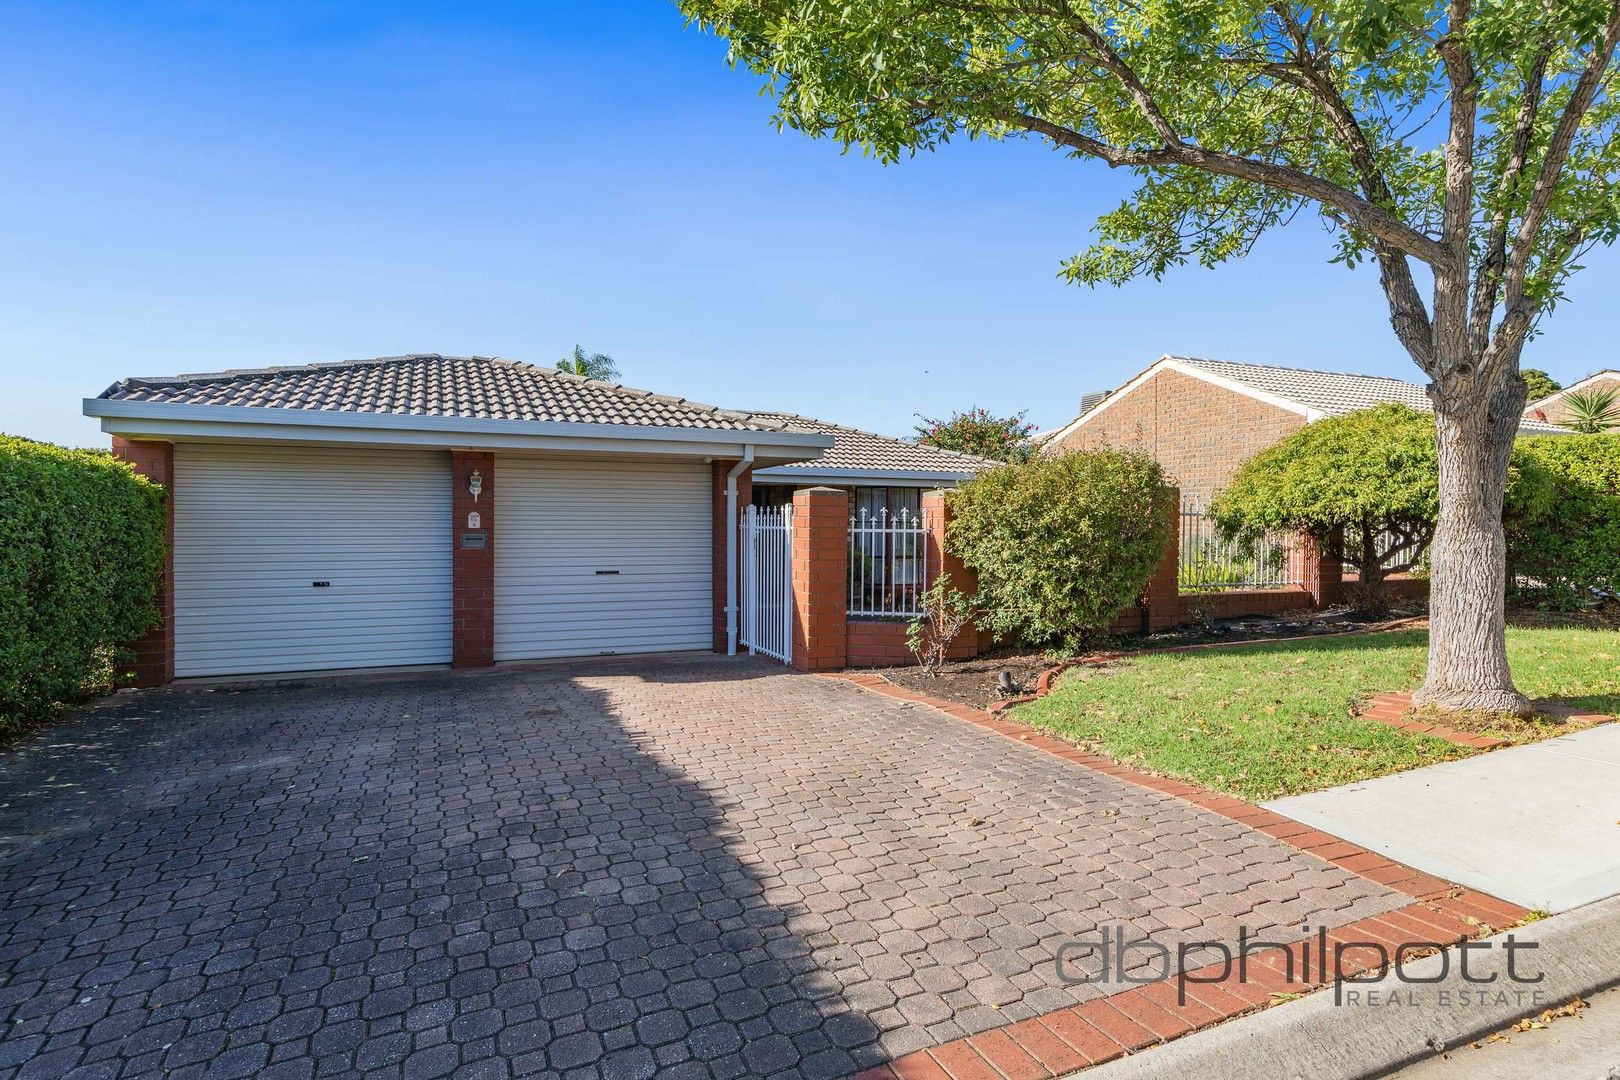 3 bedrooms House in 8 Frontignac Court WYNN VALE SA, 5127